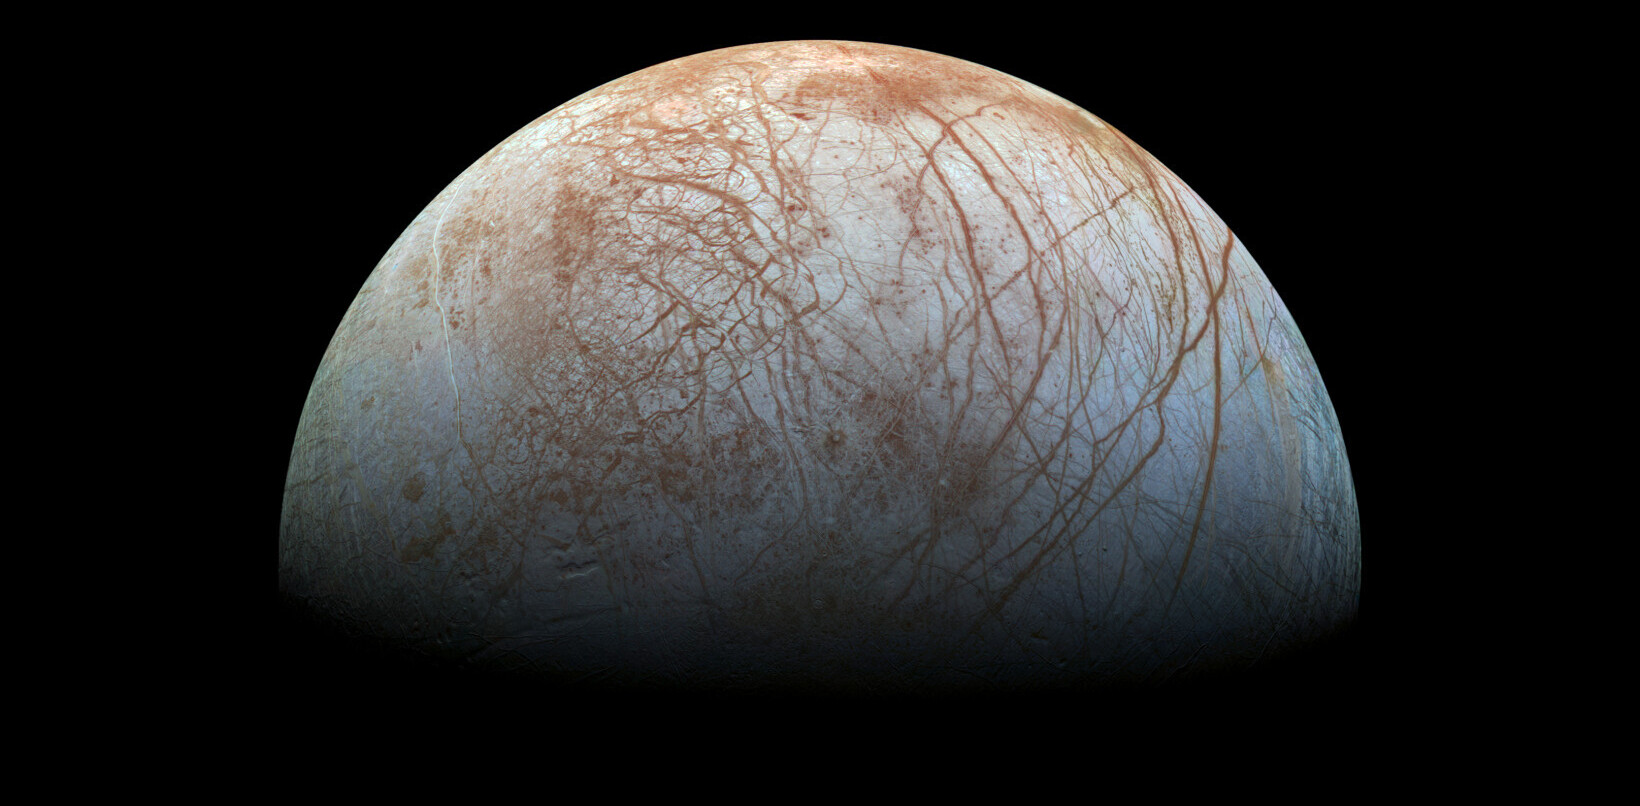 Why haven’t we found extraterrestrial life? Maybe it’s hiding under layers of rock and ice